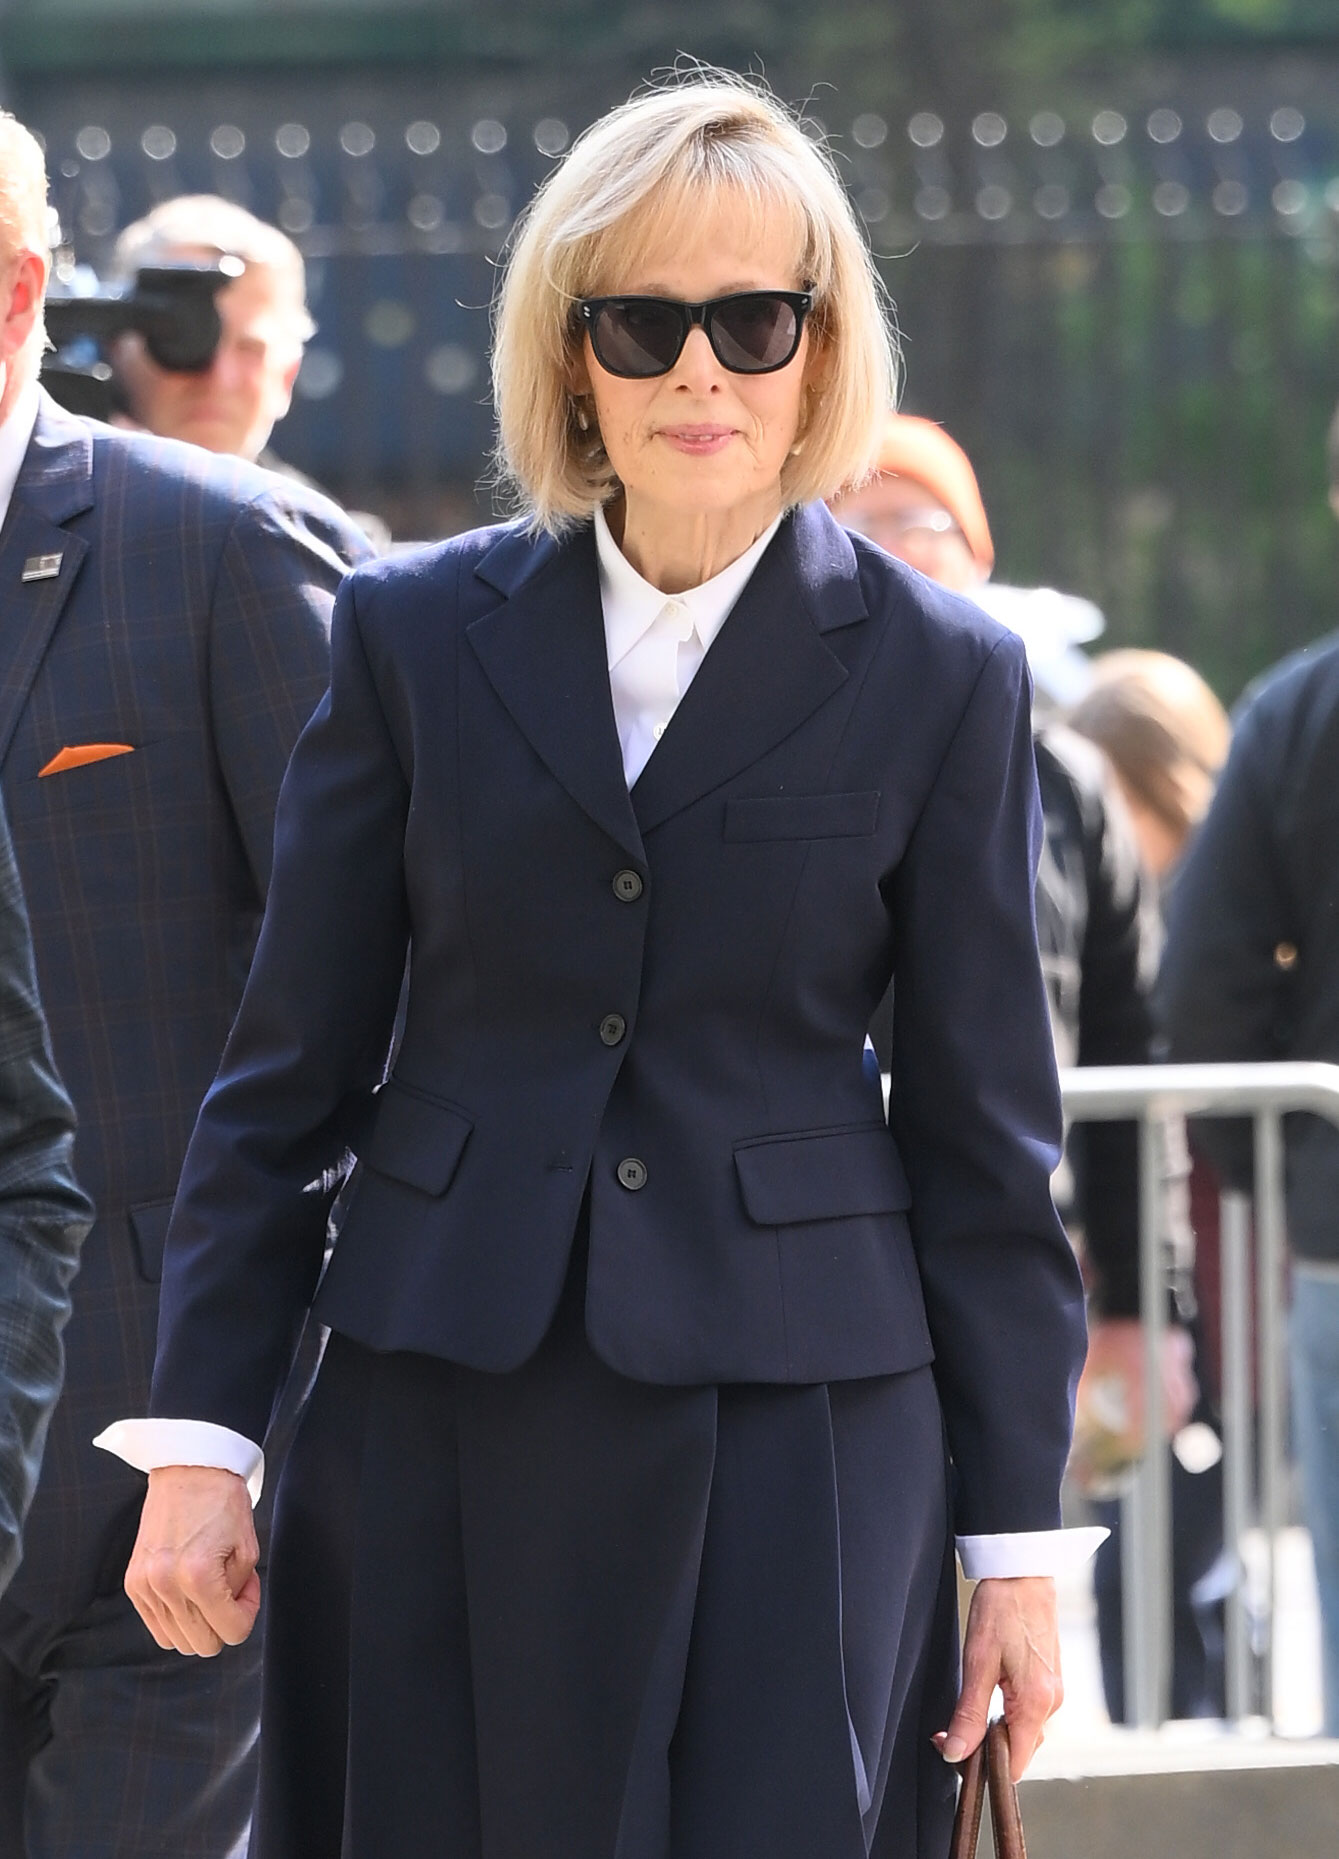 E. Jean Carroll at Federal Manhattan New York Court during her trial against Donald Trump